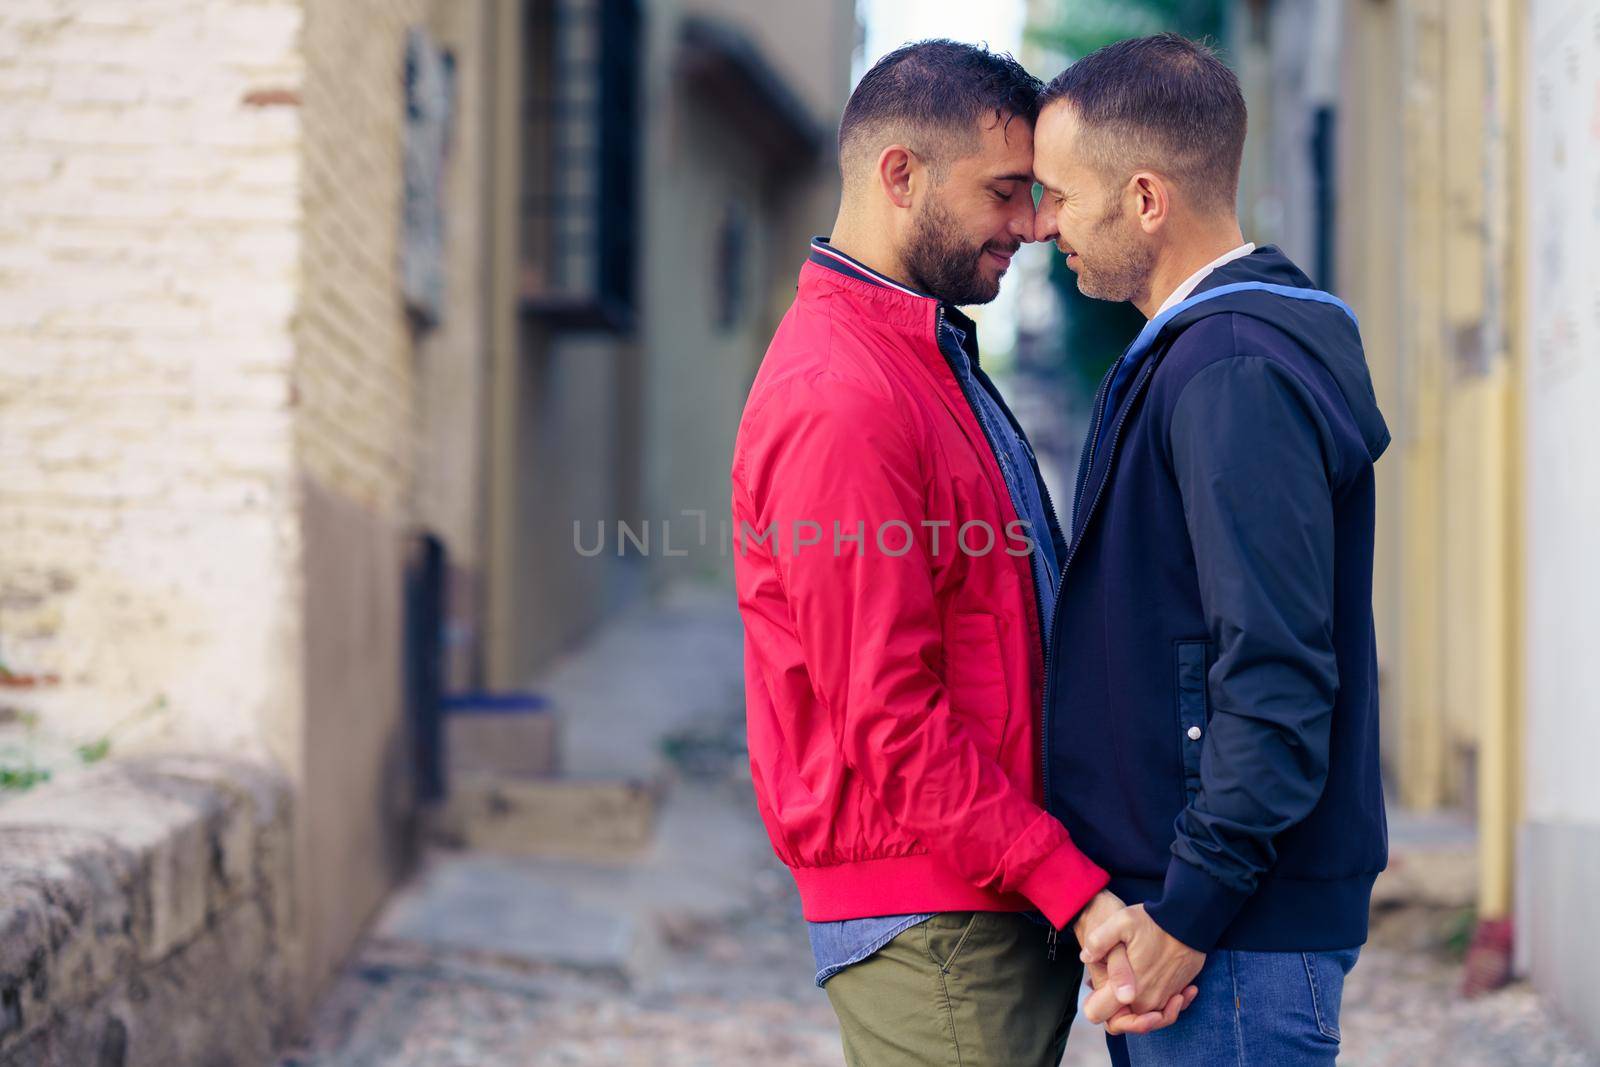 Gay couple in a romantic moment in the street. Lifestyle concept.